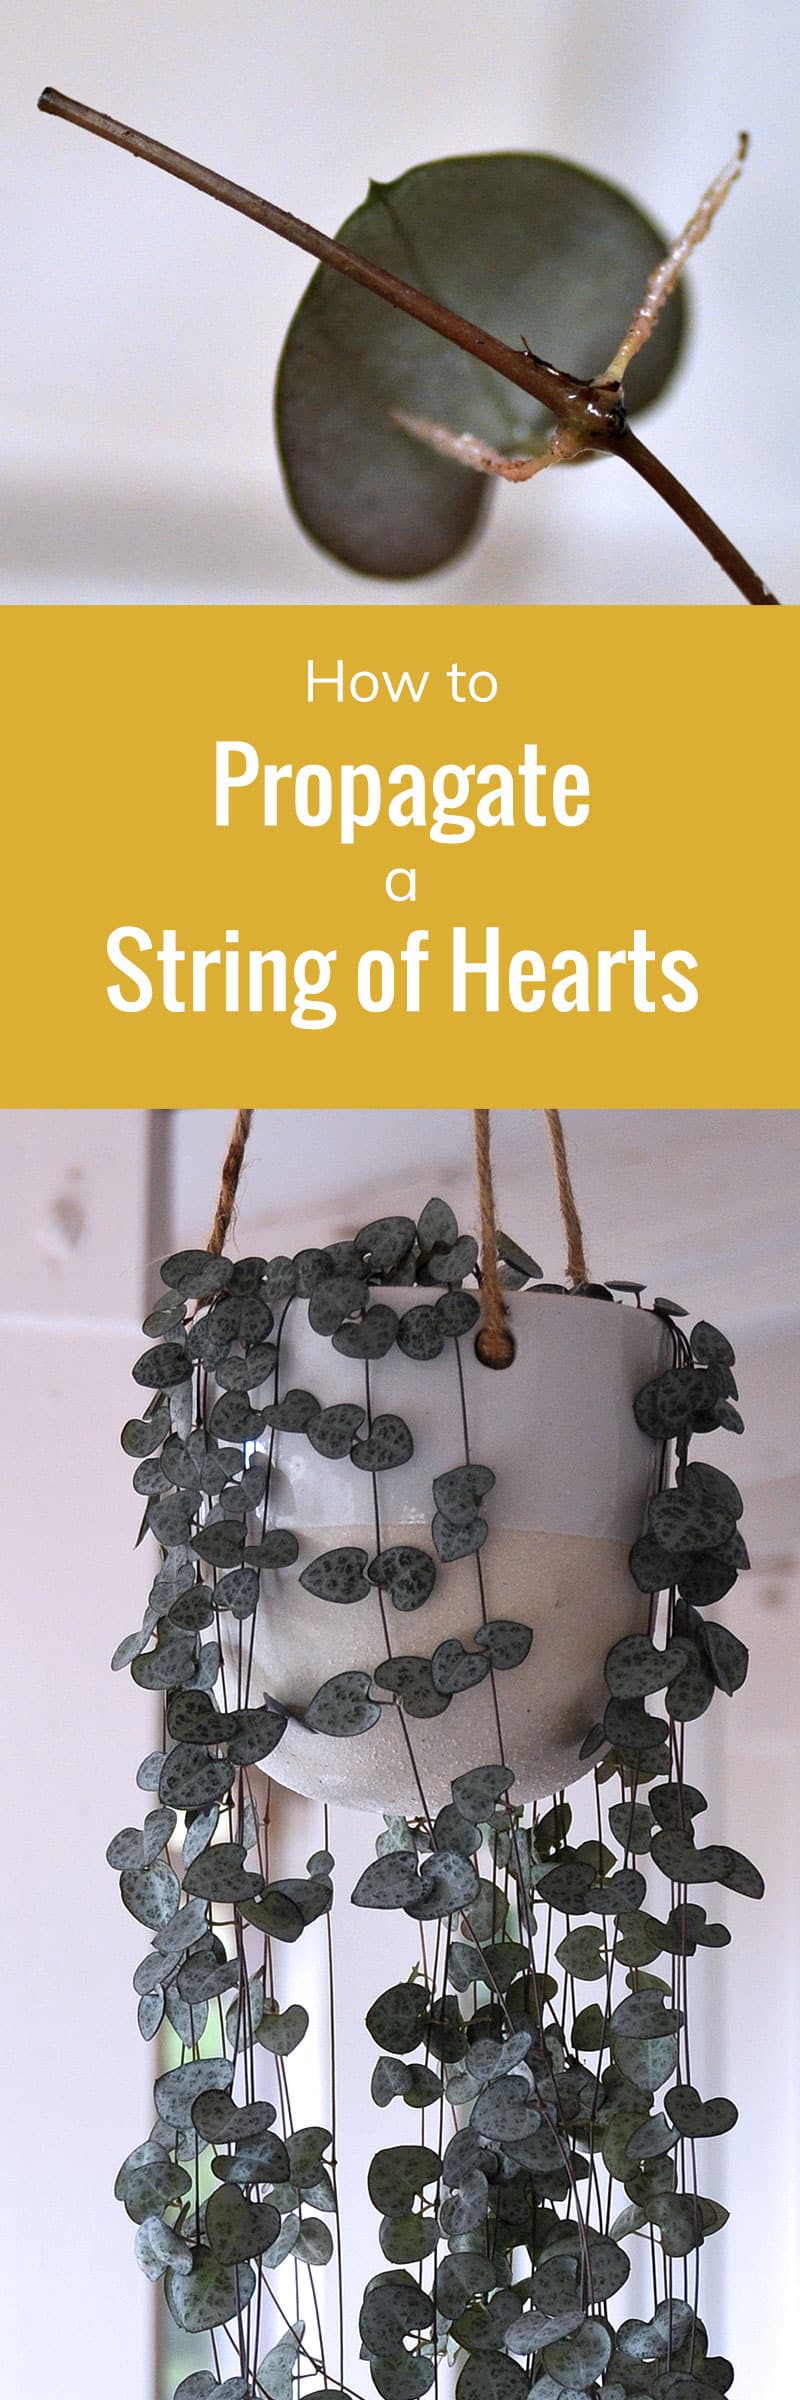 How to Propagate a String of Hearts